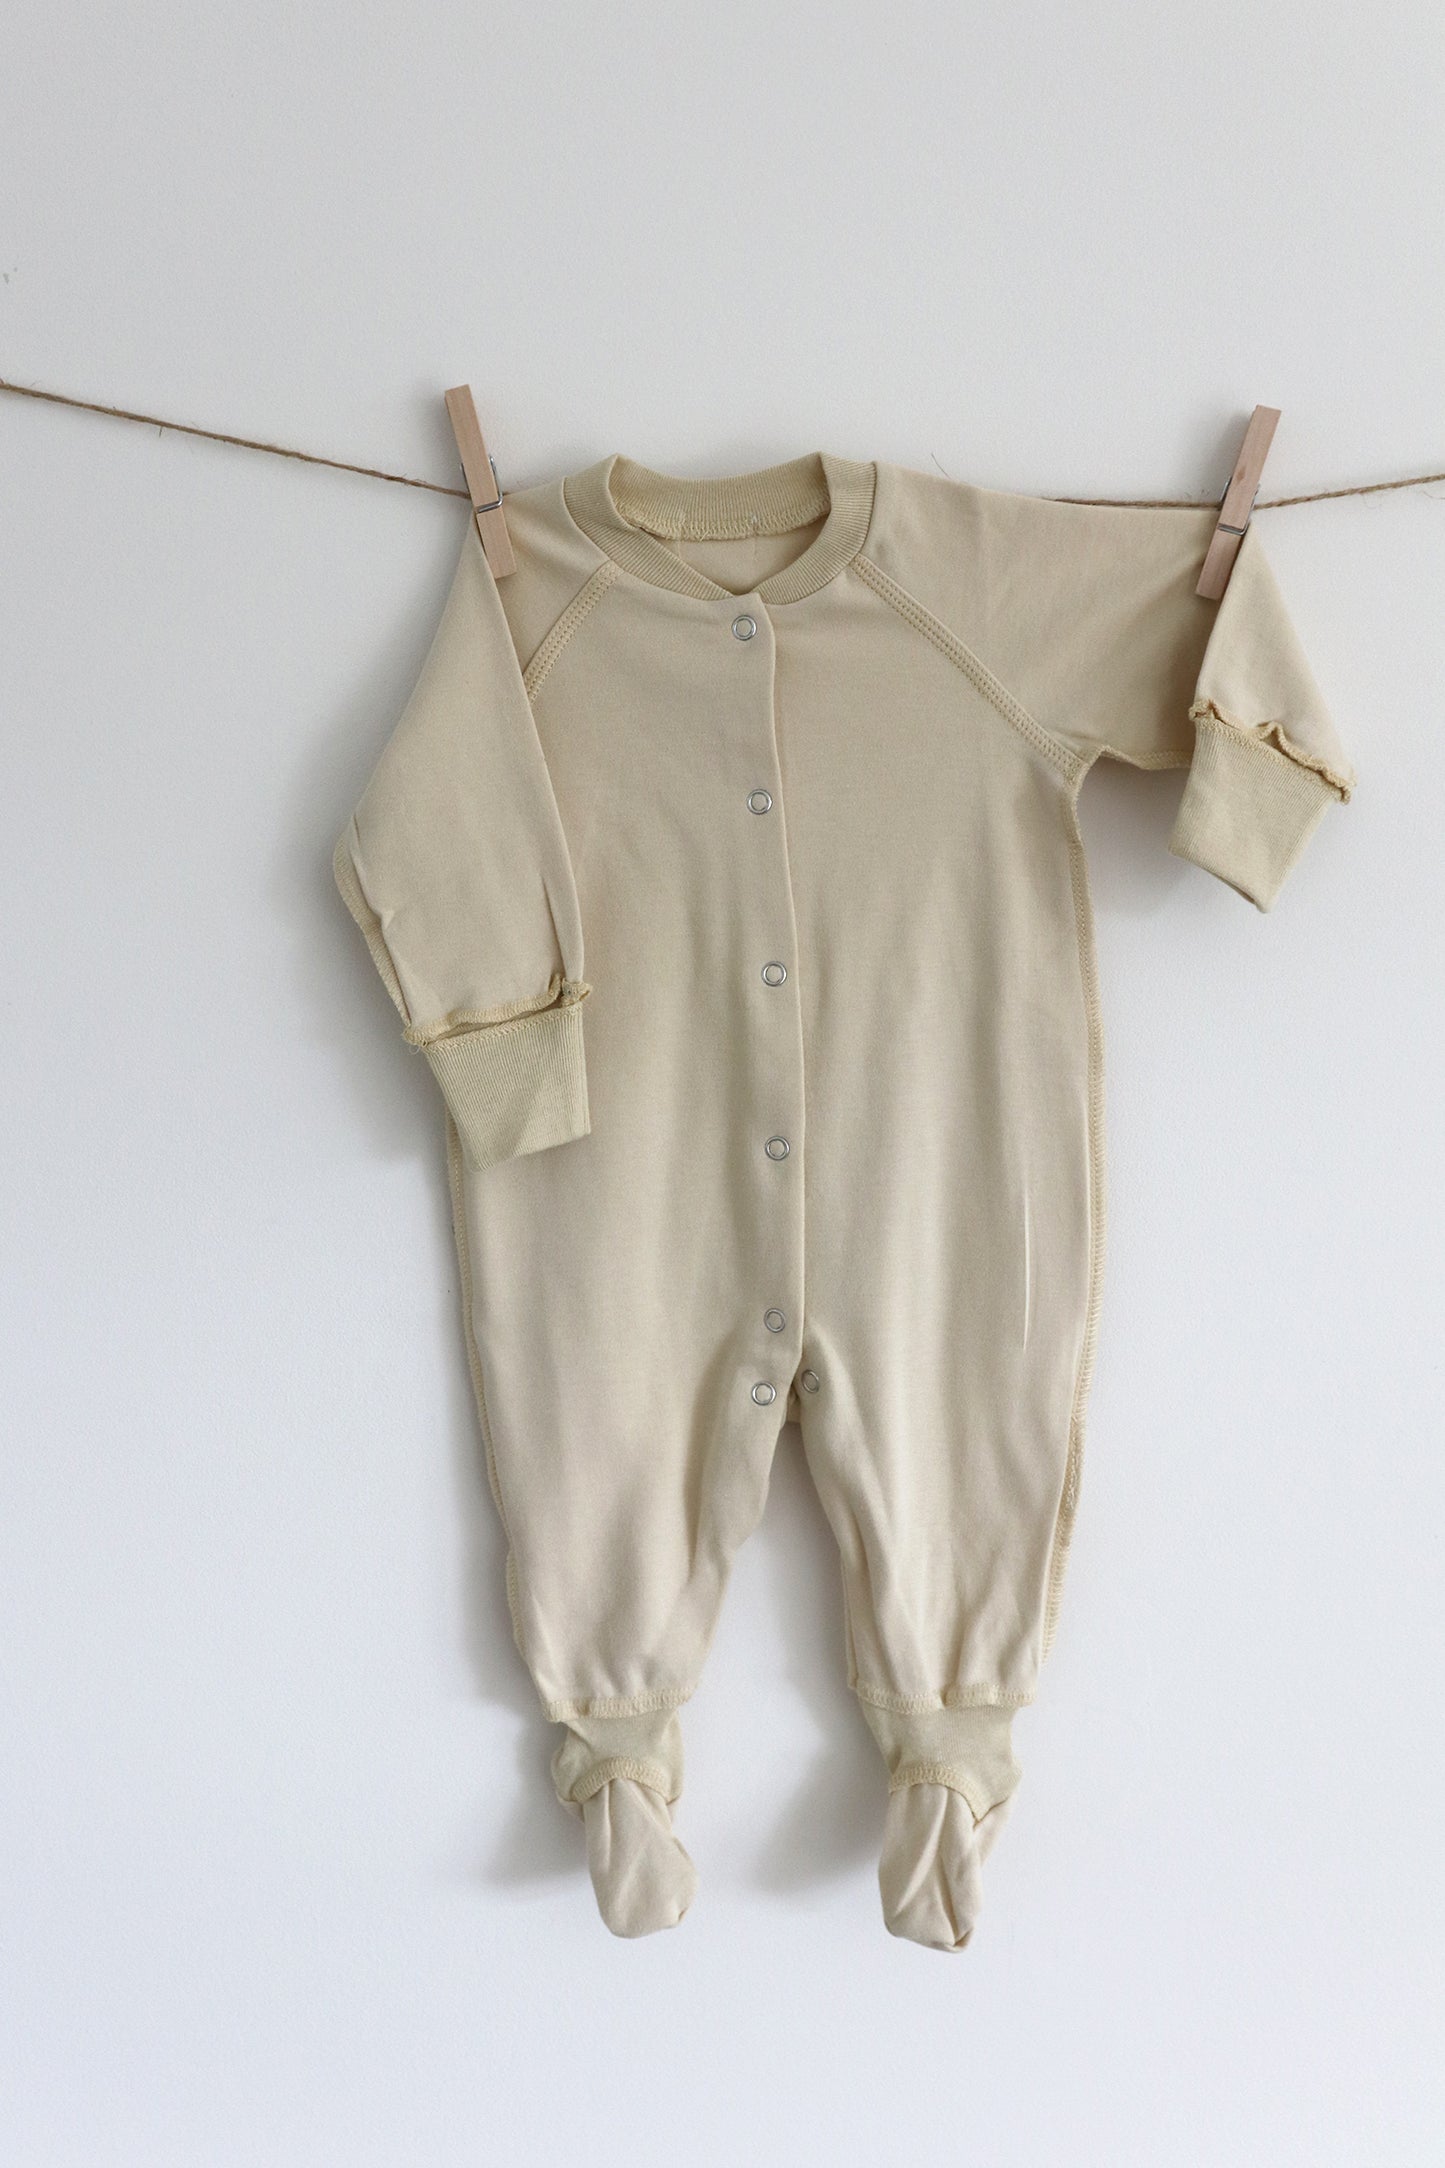 Gift shopping for infant essentials, you have found the best neutral tone unisex sleepsuit onesie, that is especially perfect for sensitive skin and newborn skin rash. 